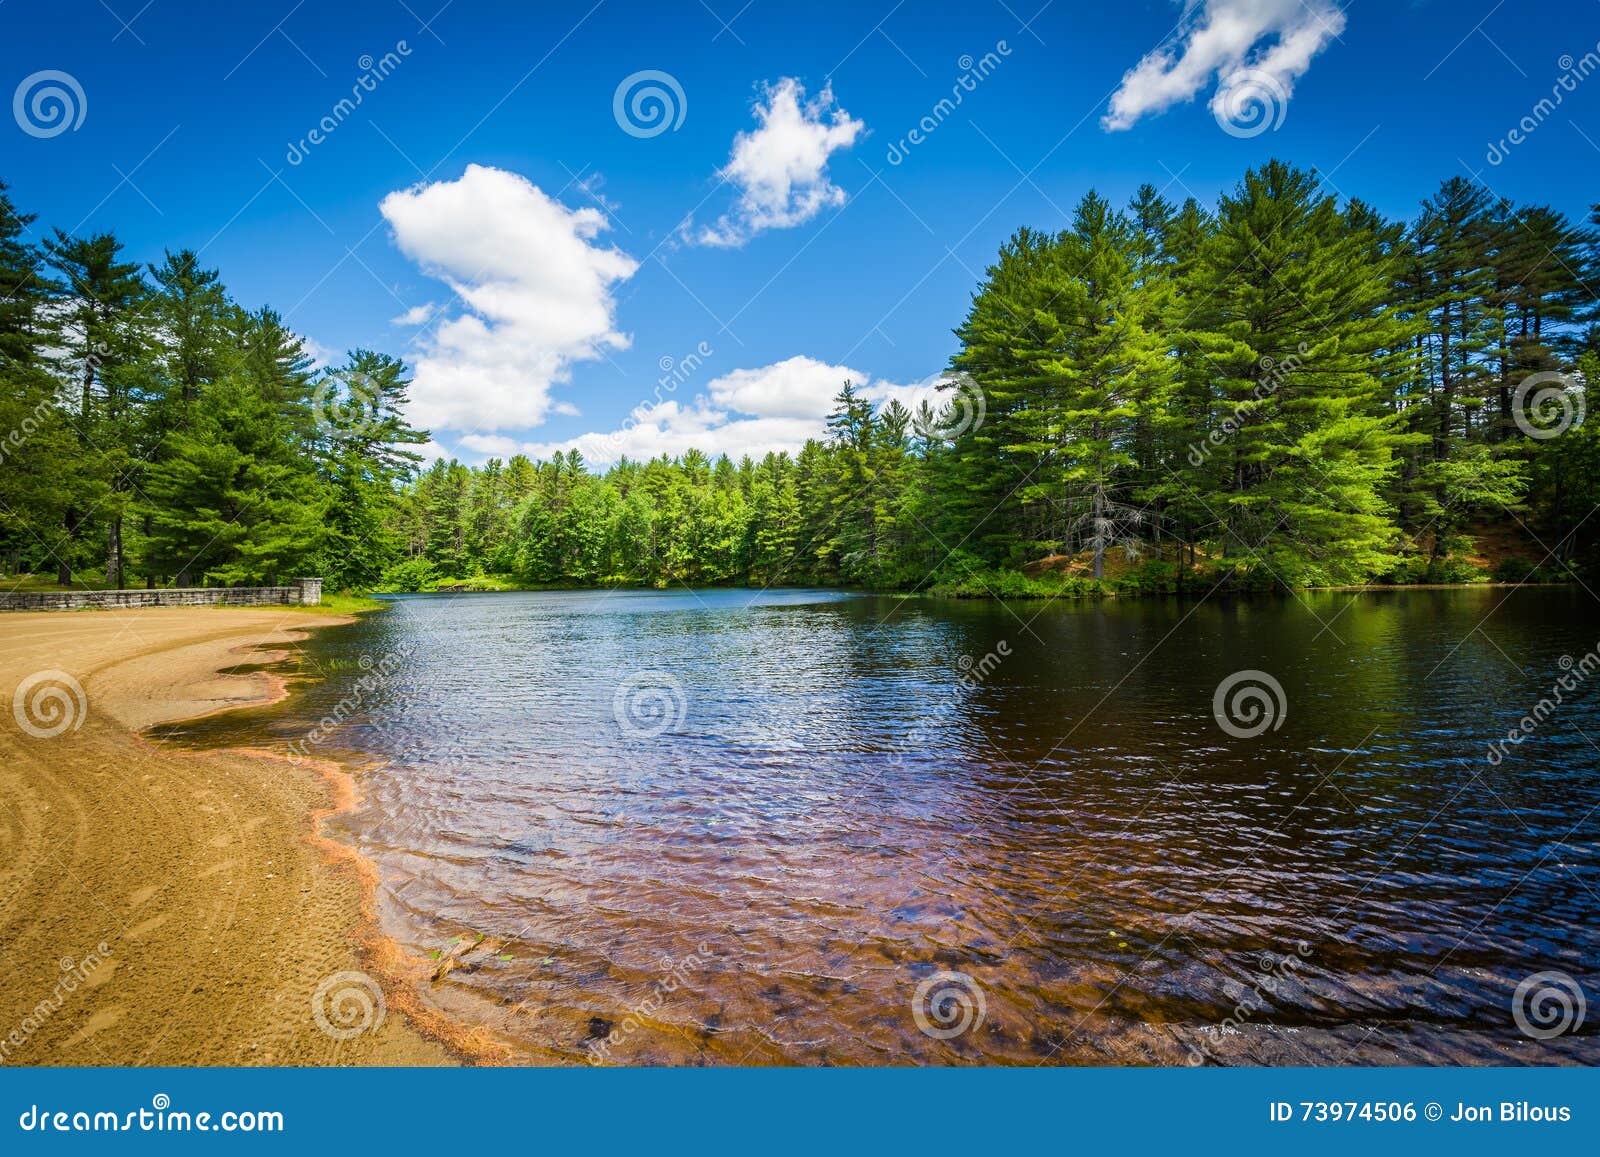 beach on a lake at bear brook state park, new hampshire.